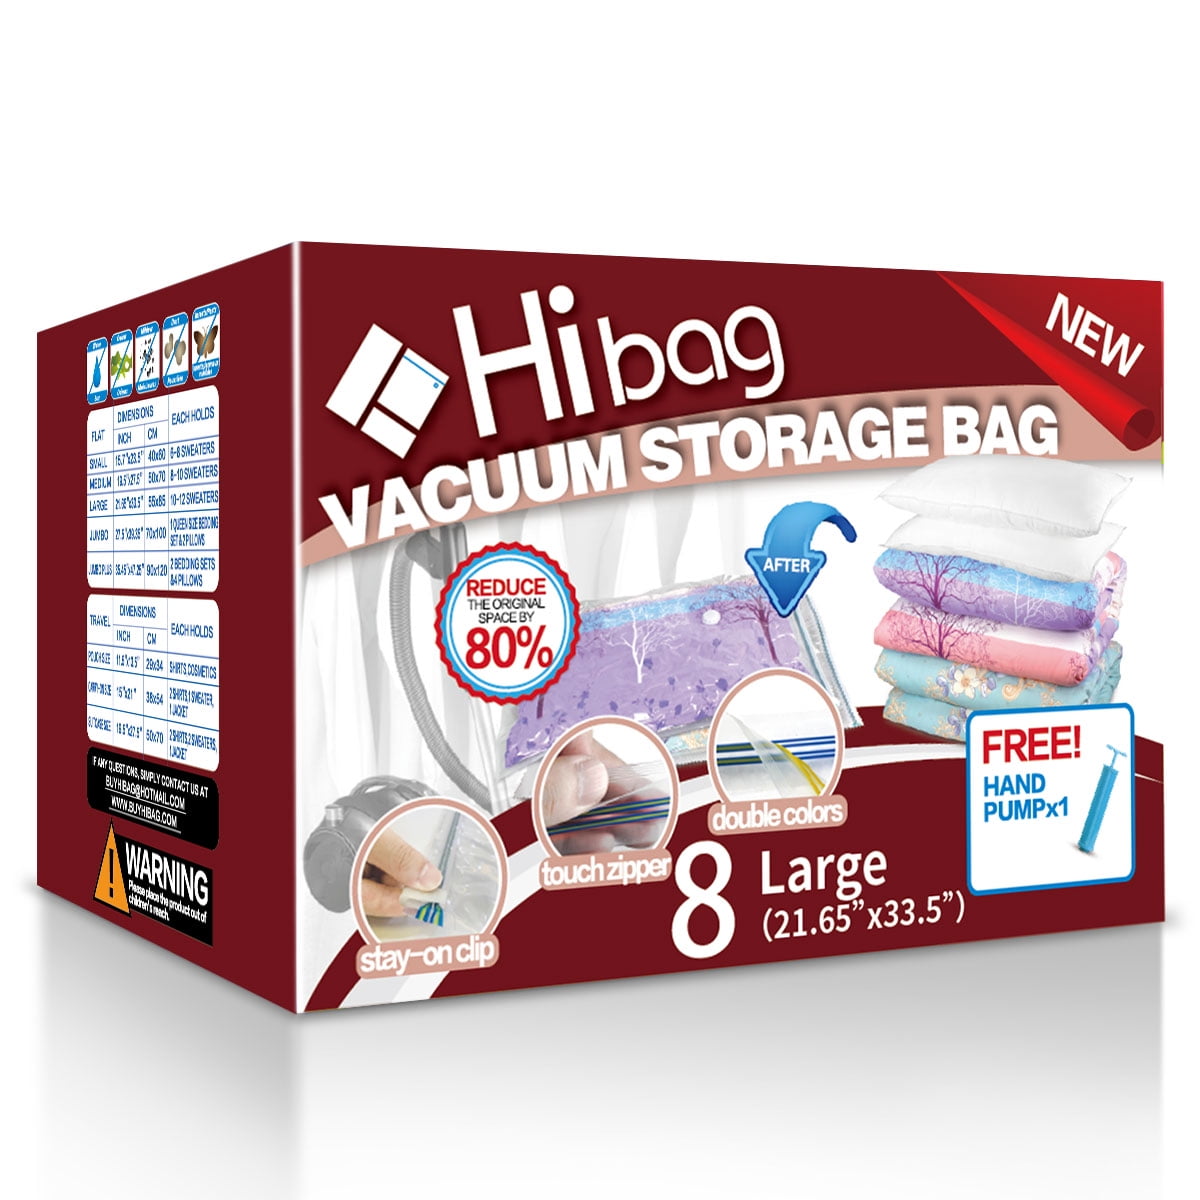  HIBAG Vacuum Storage Bags, 30-Pack Space Saver Vacuum Storage  Bags, Vacuum Seal Bags for Clothing, Clothes, Comforters and Blankets (30C)  : Home & Kitchen